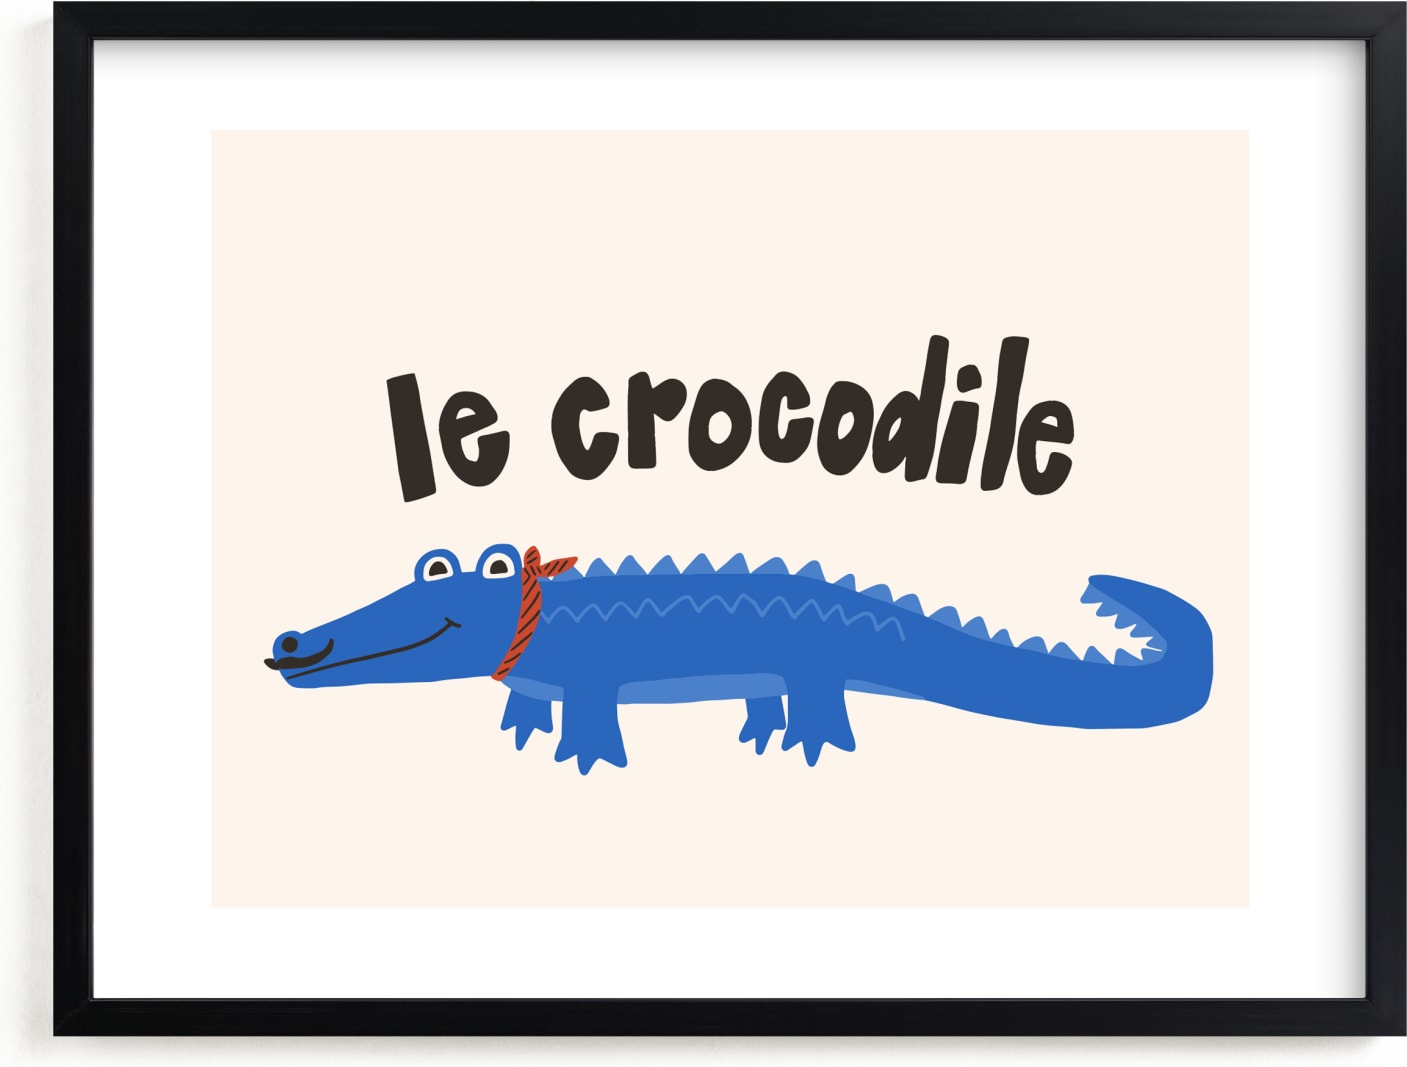 This is a blue, ivory, red art by Morgan Kendall called French Crocodile.